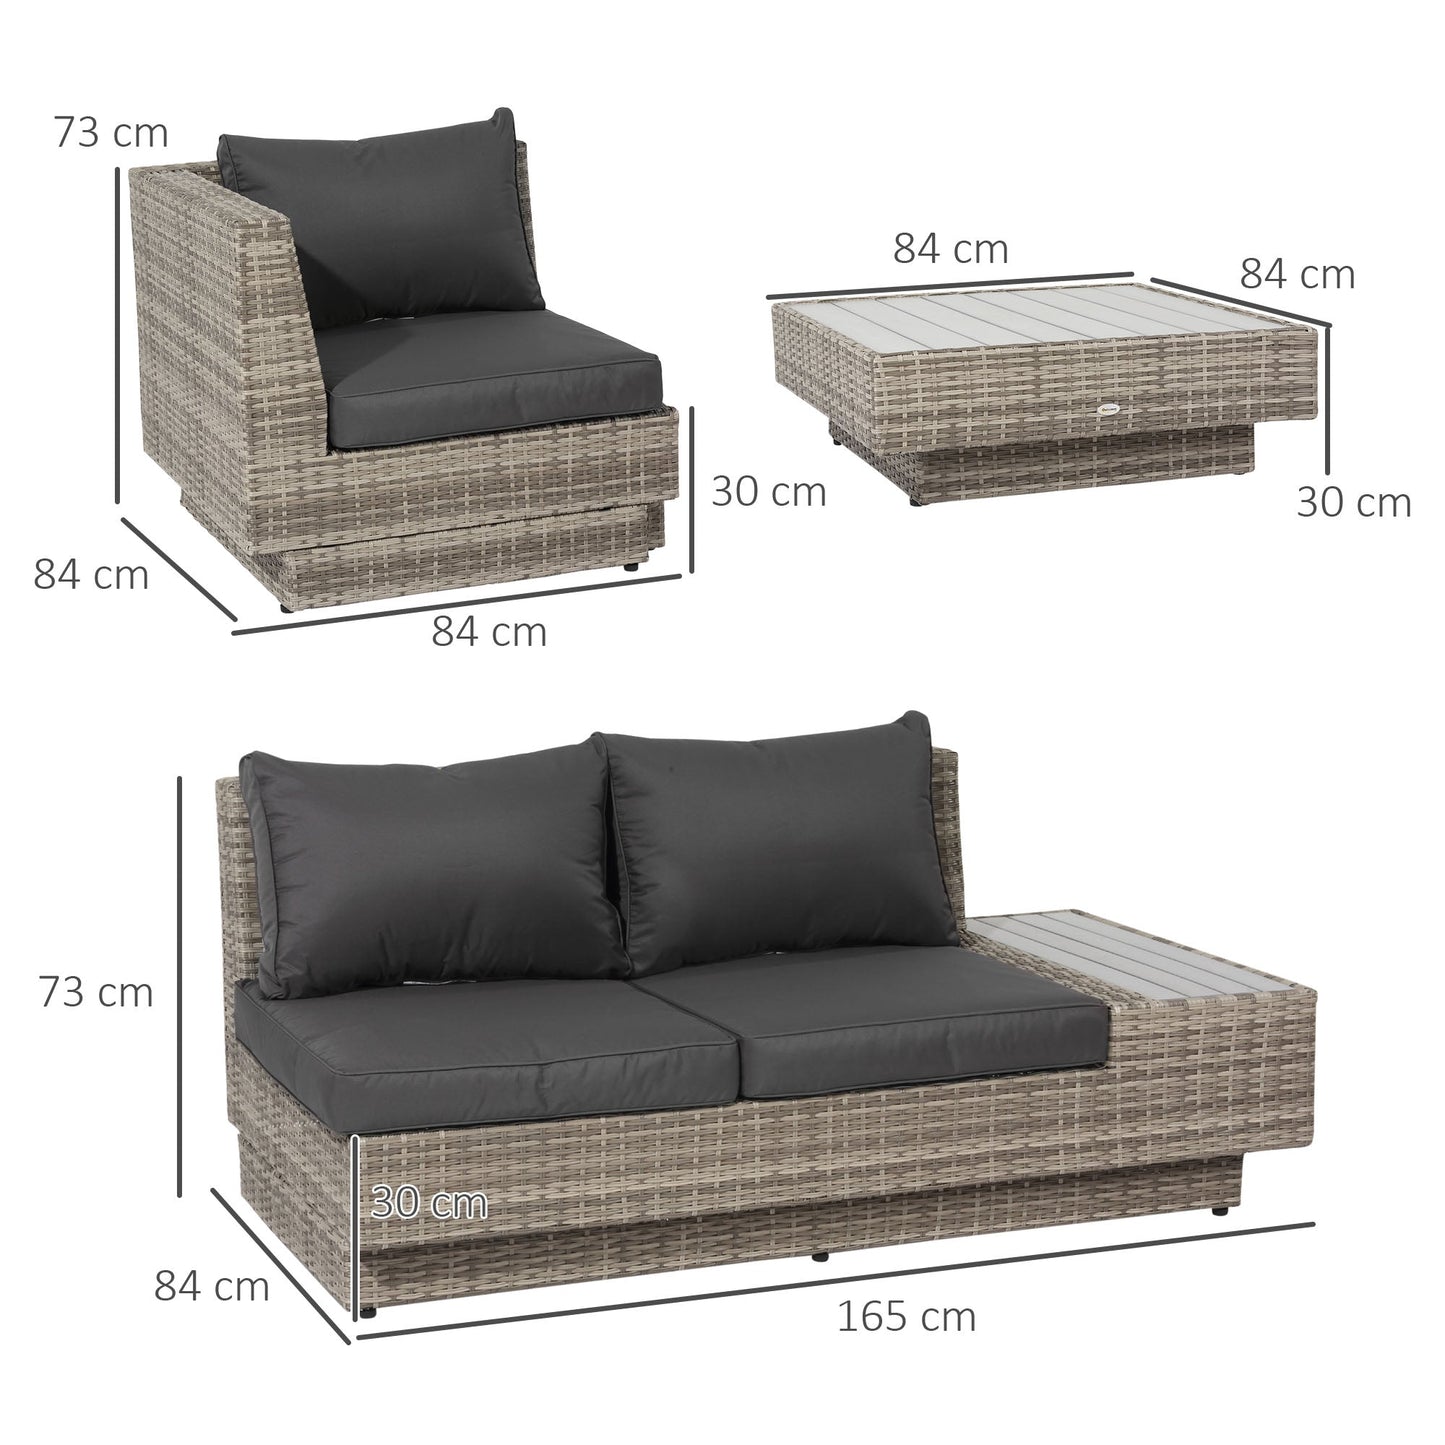 Outsunny 5-Seater Rattan Garden Furniture Outdoor Sectional Corner Sofa and Coffee Table Set  Conservatory Wicker Weave w/ Armrest Cushions, Light Grey